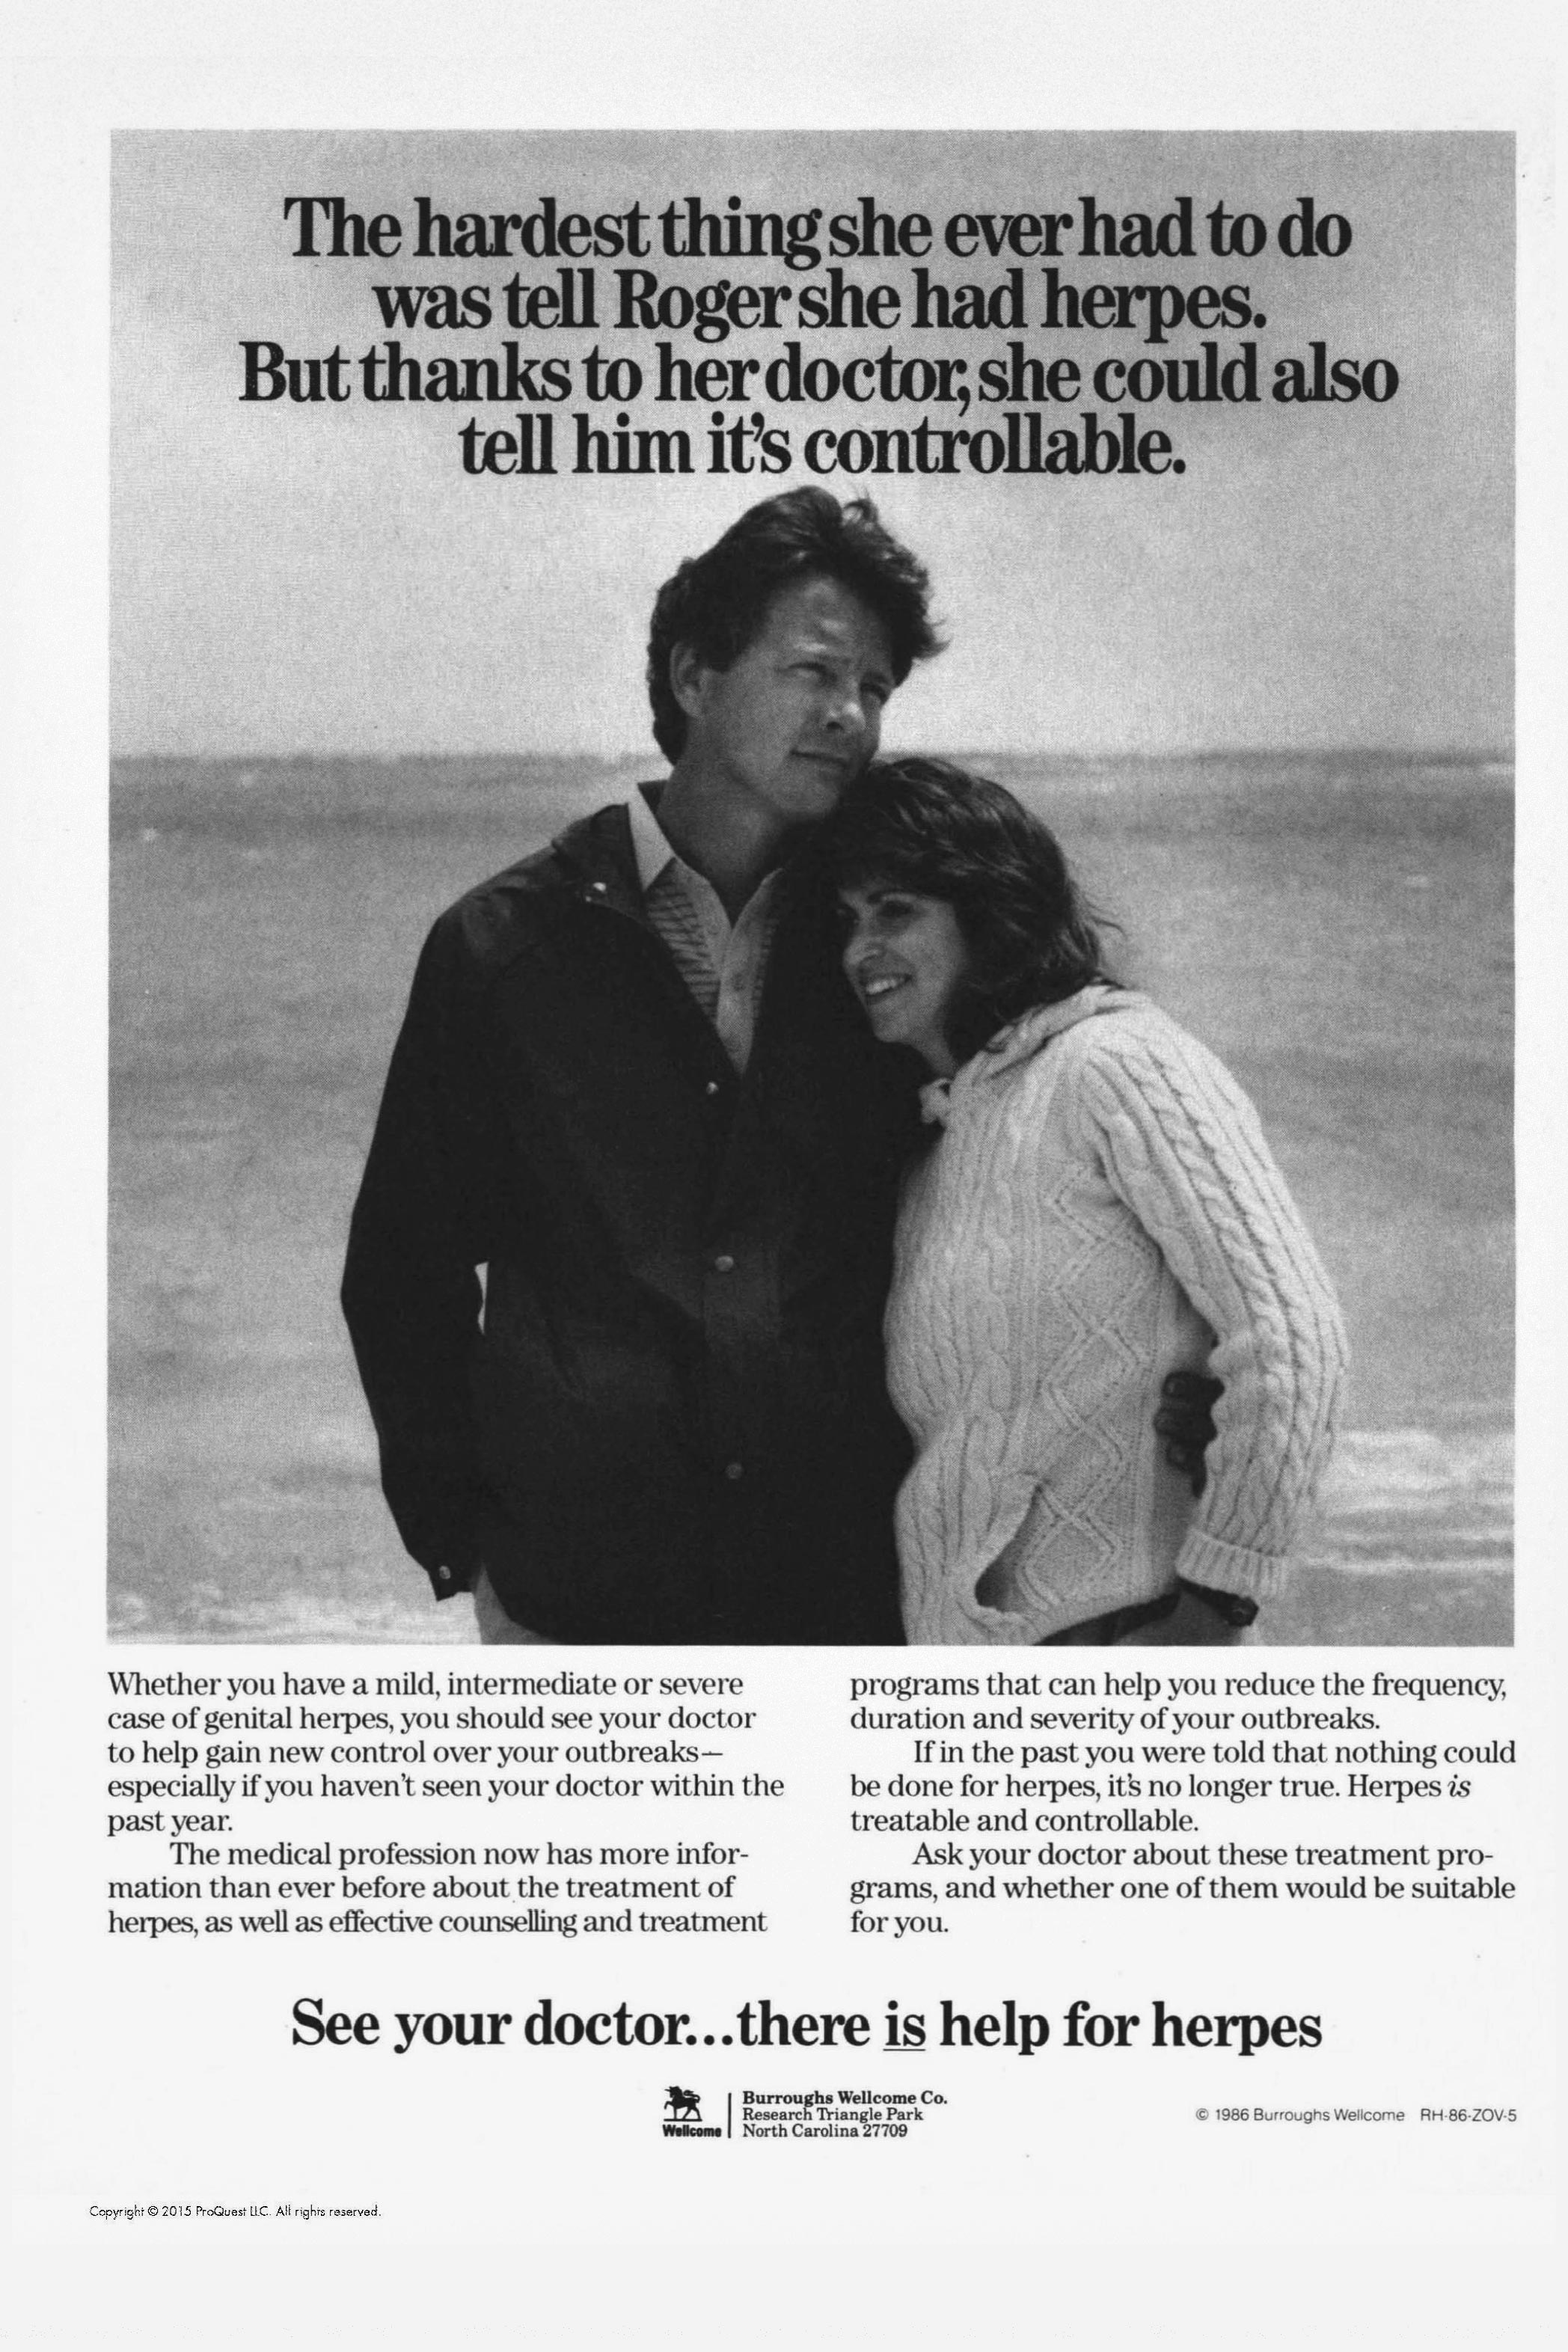 Burroughs Wellcome ad for Zovirax reading "The hardest thing she ever had to do was tell Roger she had herpes. But thanks to her doctor, she could also tell him it's controllable."